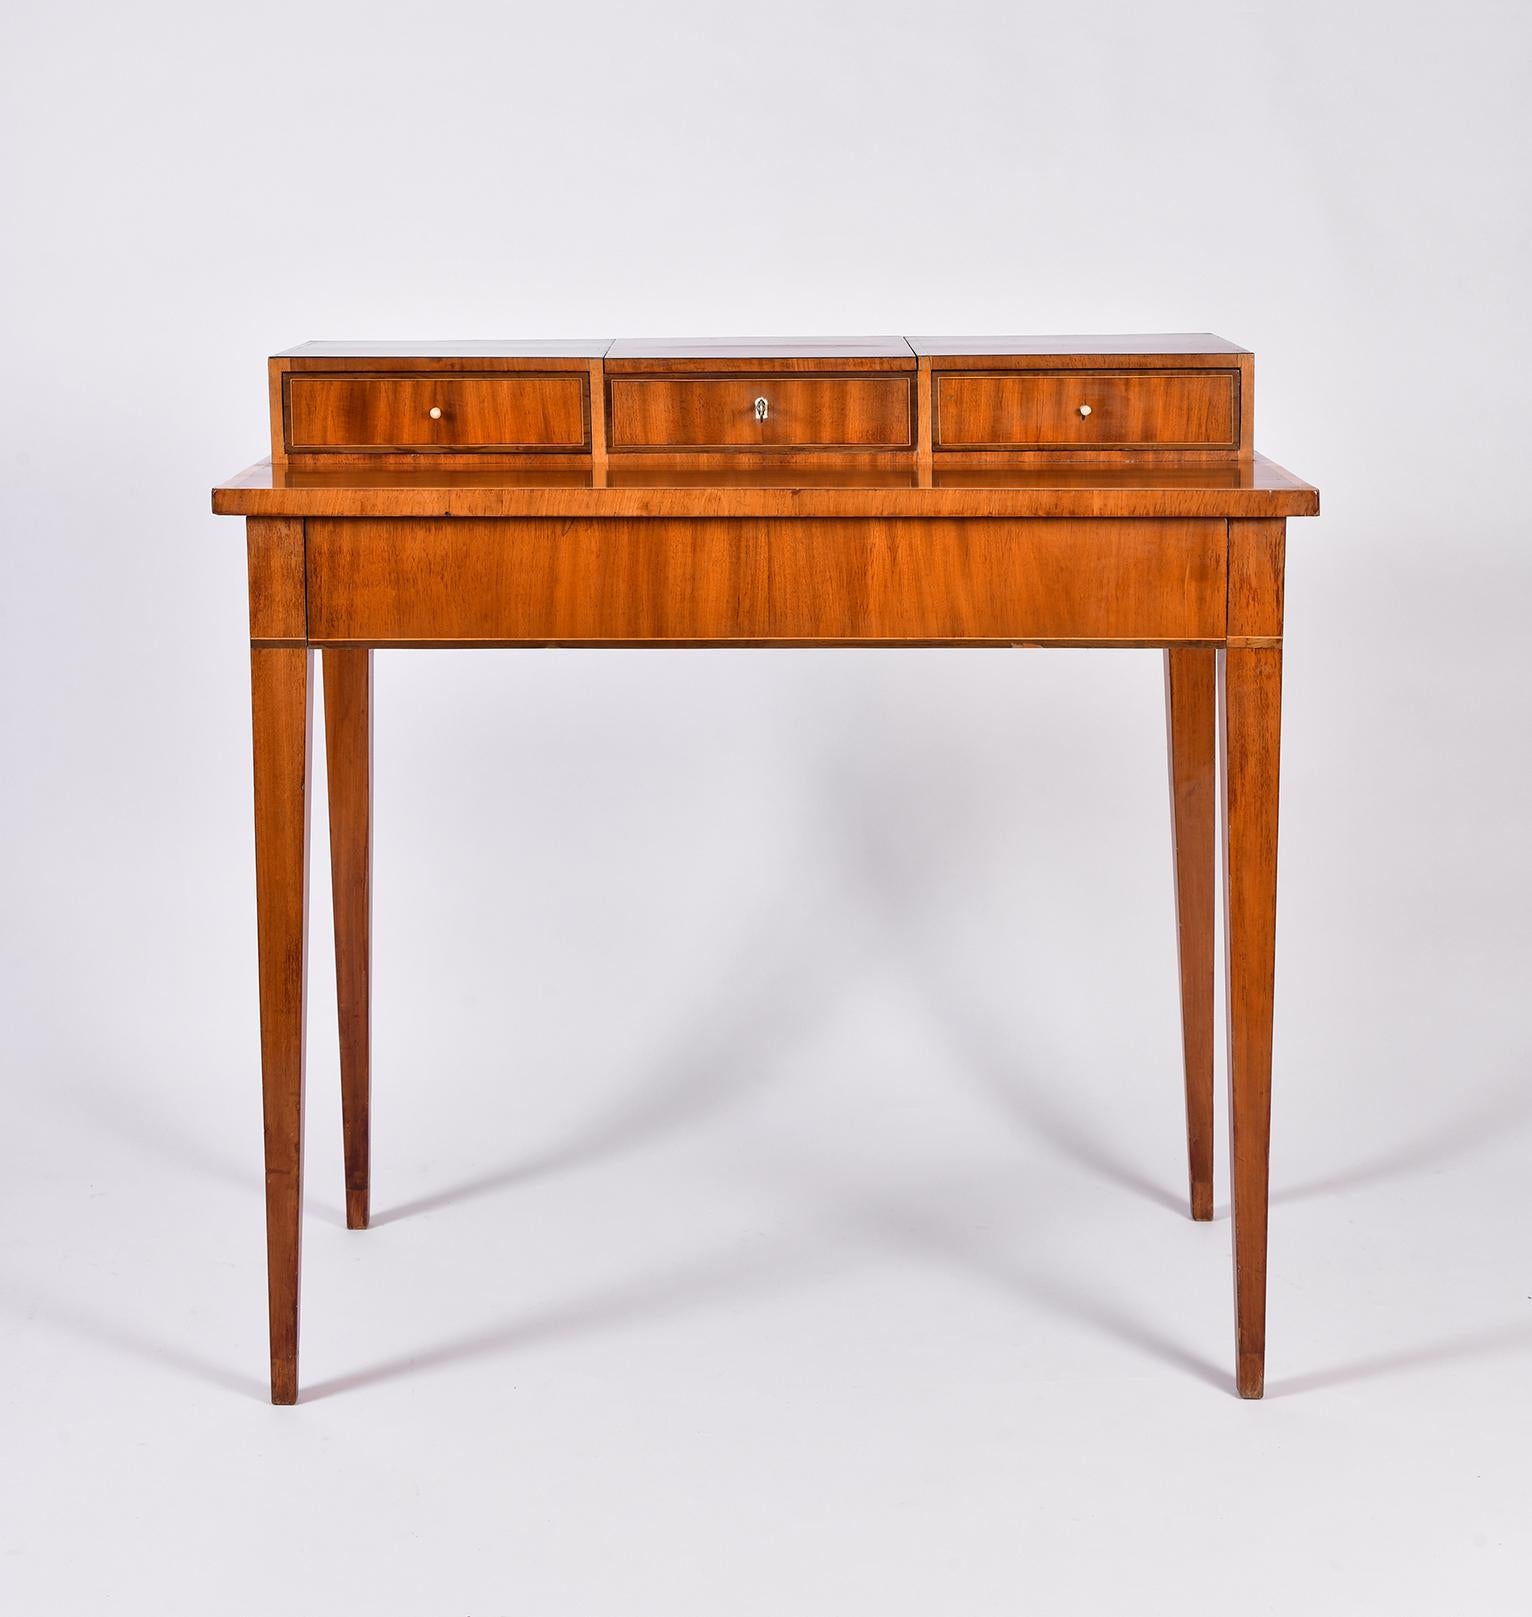 An early 19th century mahogany dressing table, the top with a long drawers above four tapered legs, topped with three drawers with bone handles, the middle dummy drawer revealing an unfolding mirror.
Sweden, circa 1830.